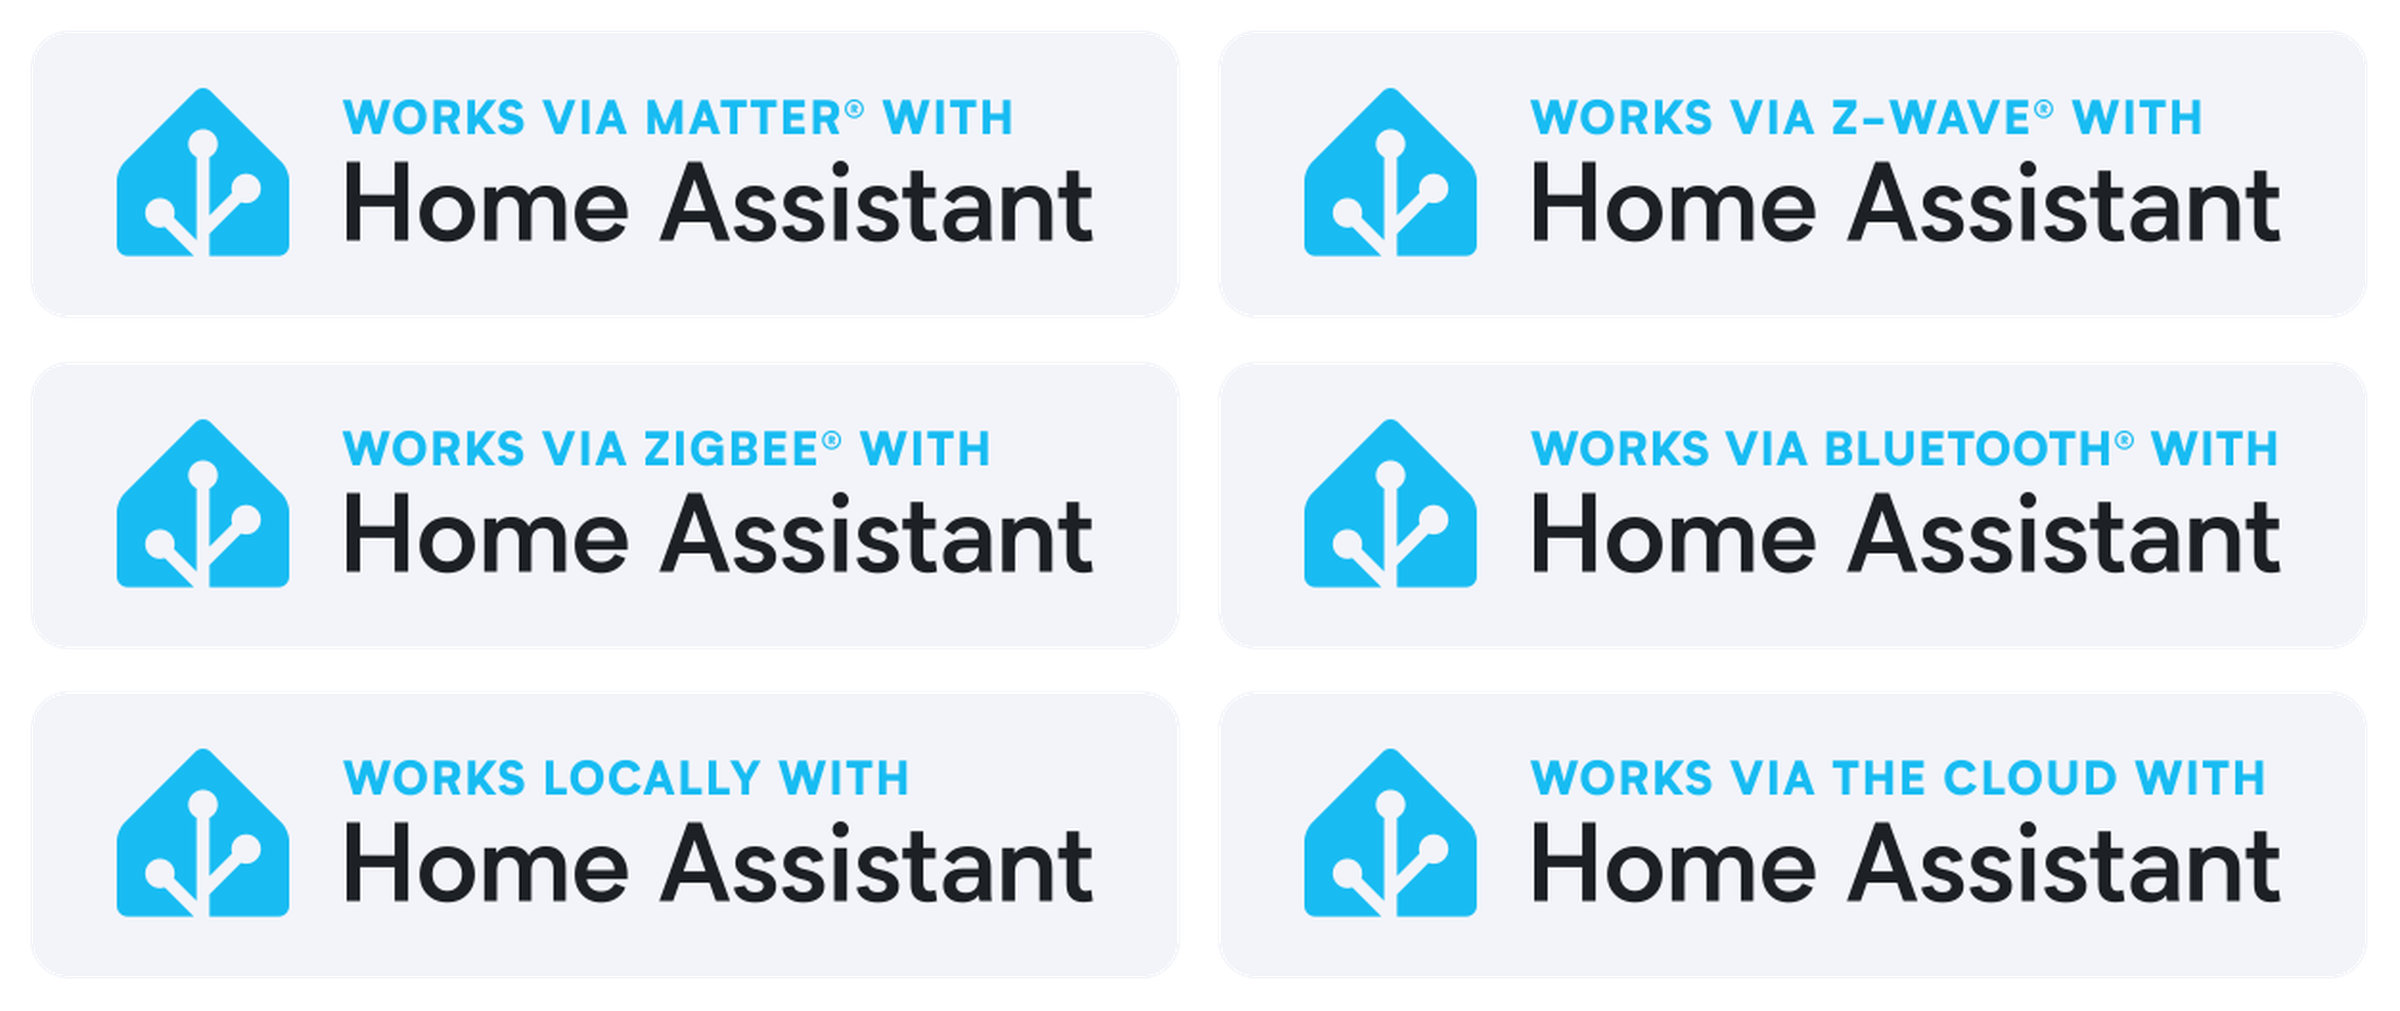 Works With Home Assistant badges are starting to appear on products to show that a product is certified to work with Home Assistant.